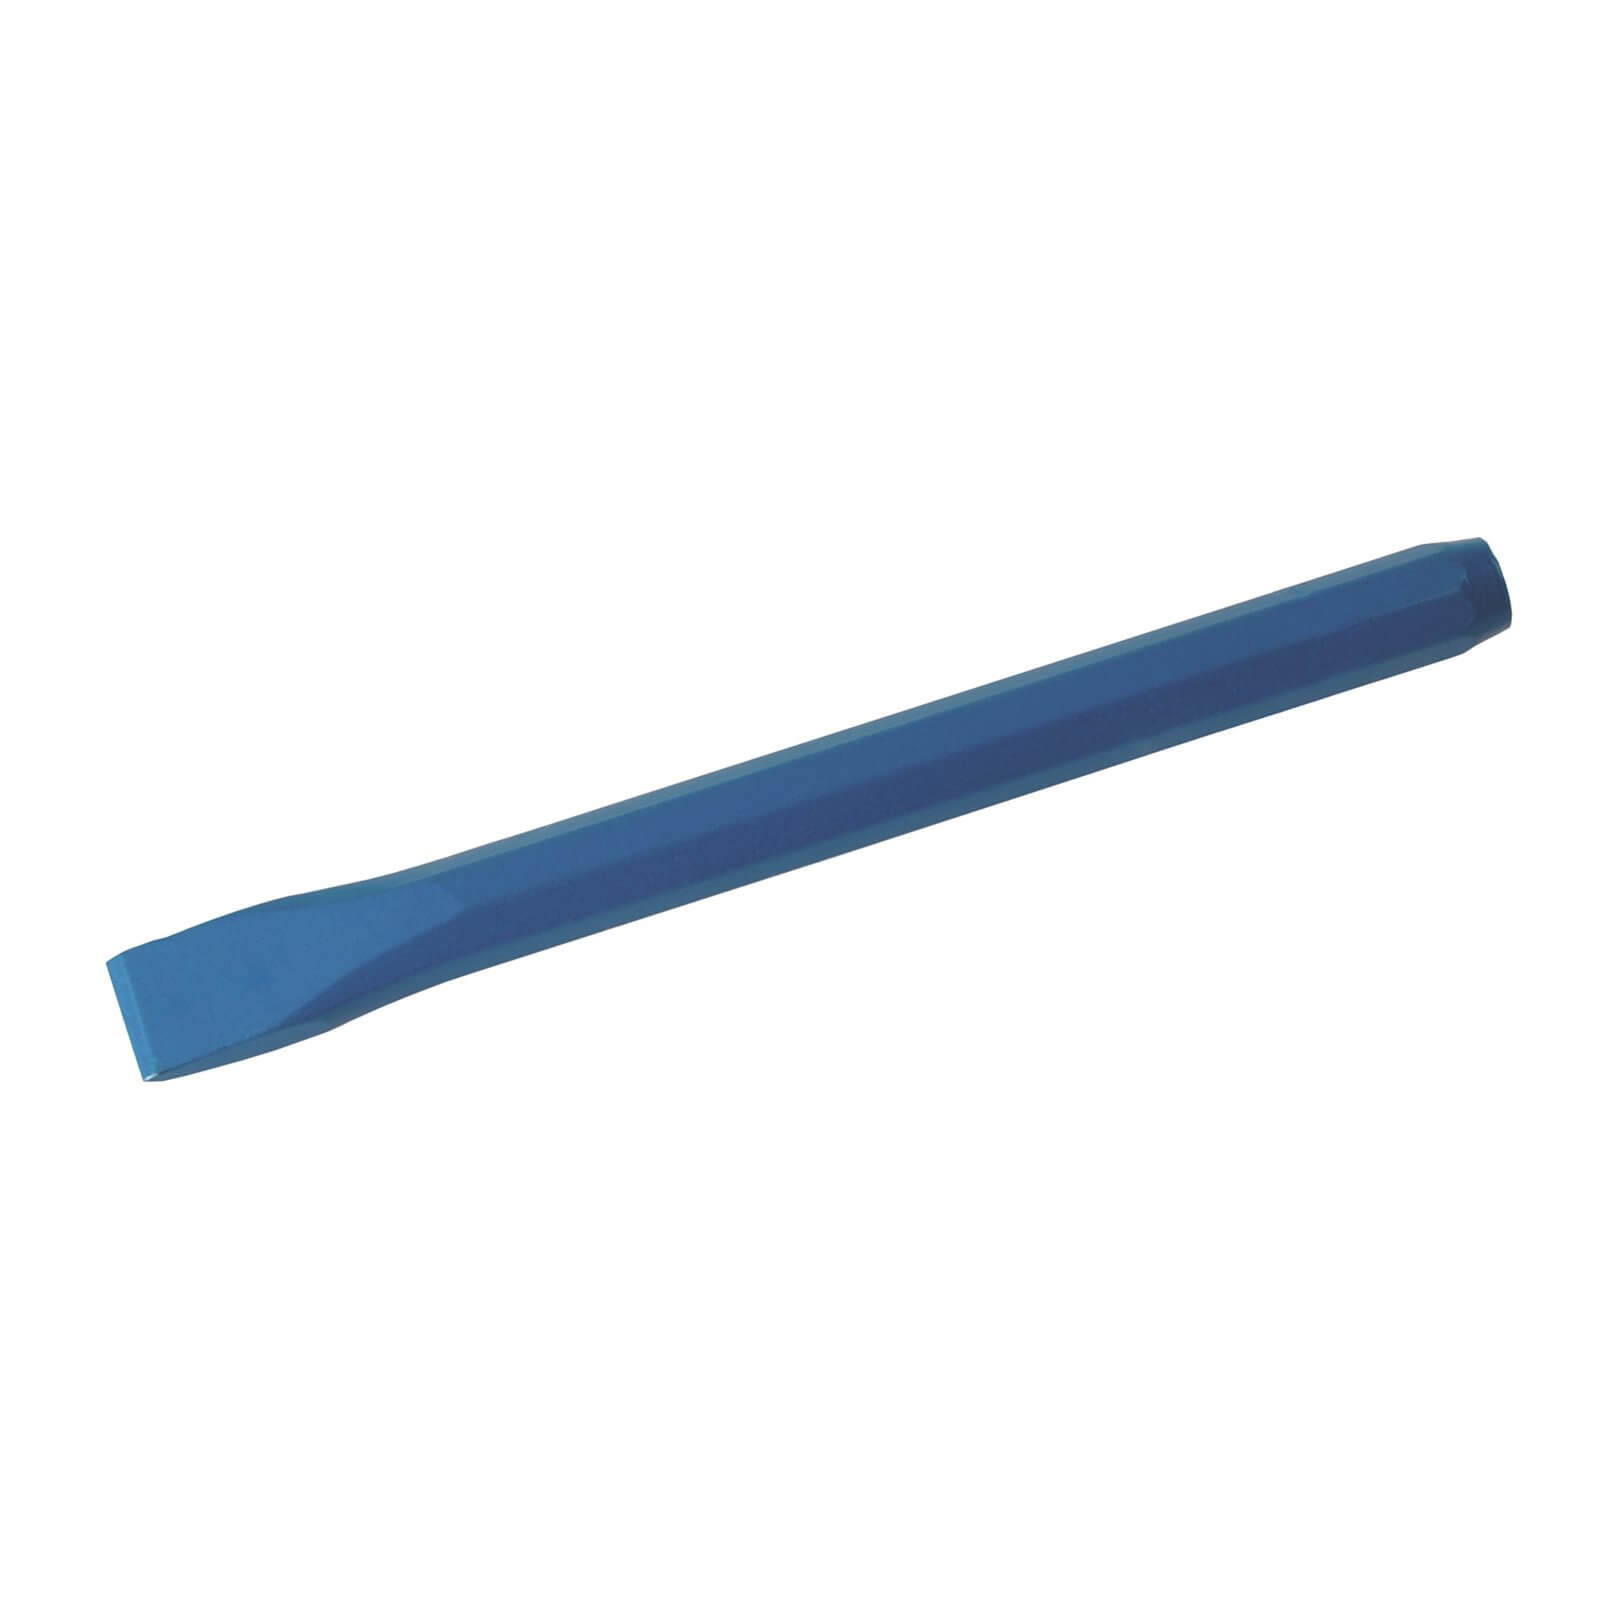 Silverline Cold Chisel - 19x200mm